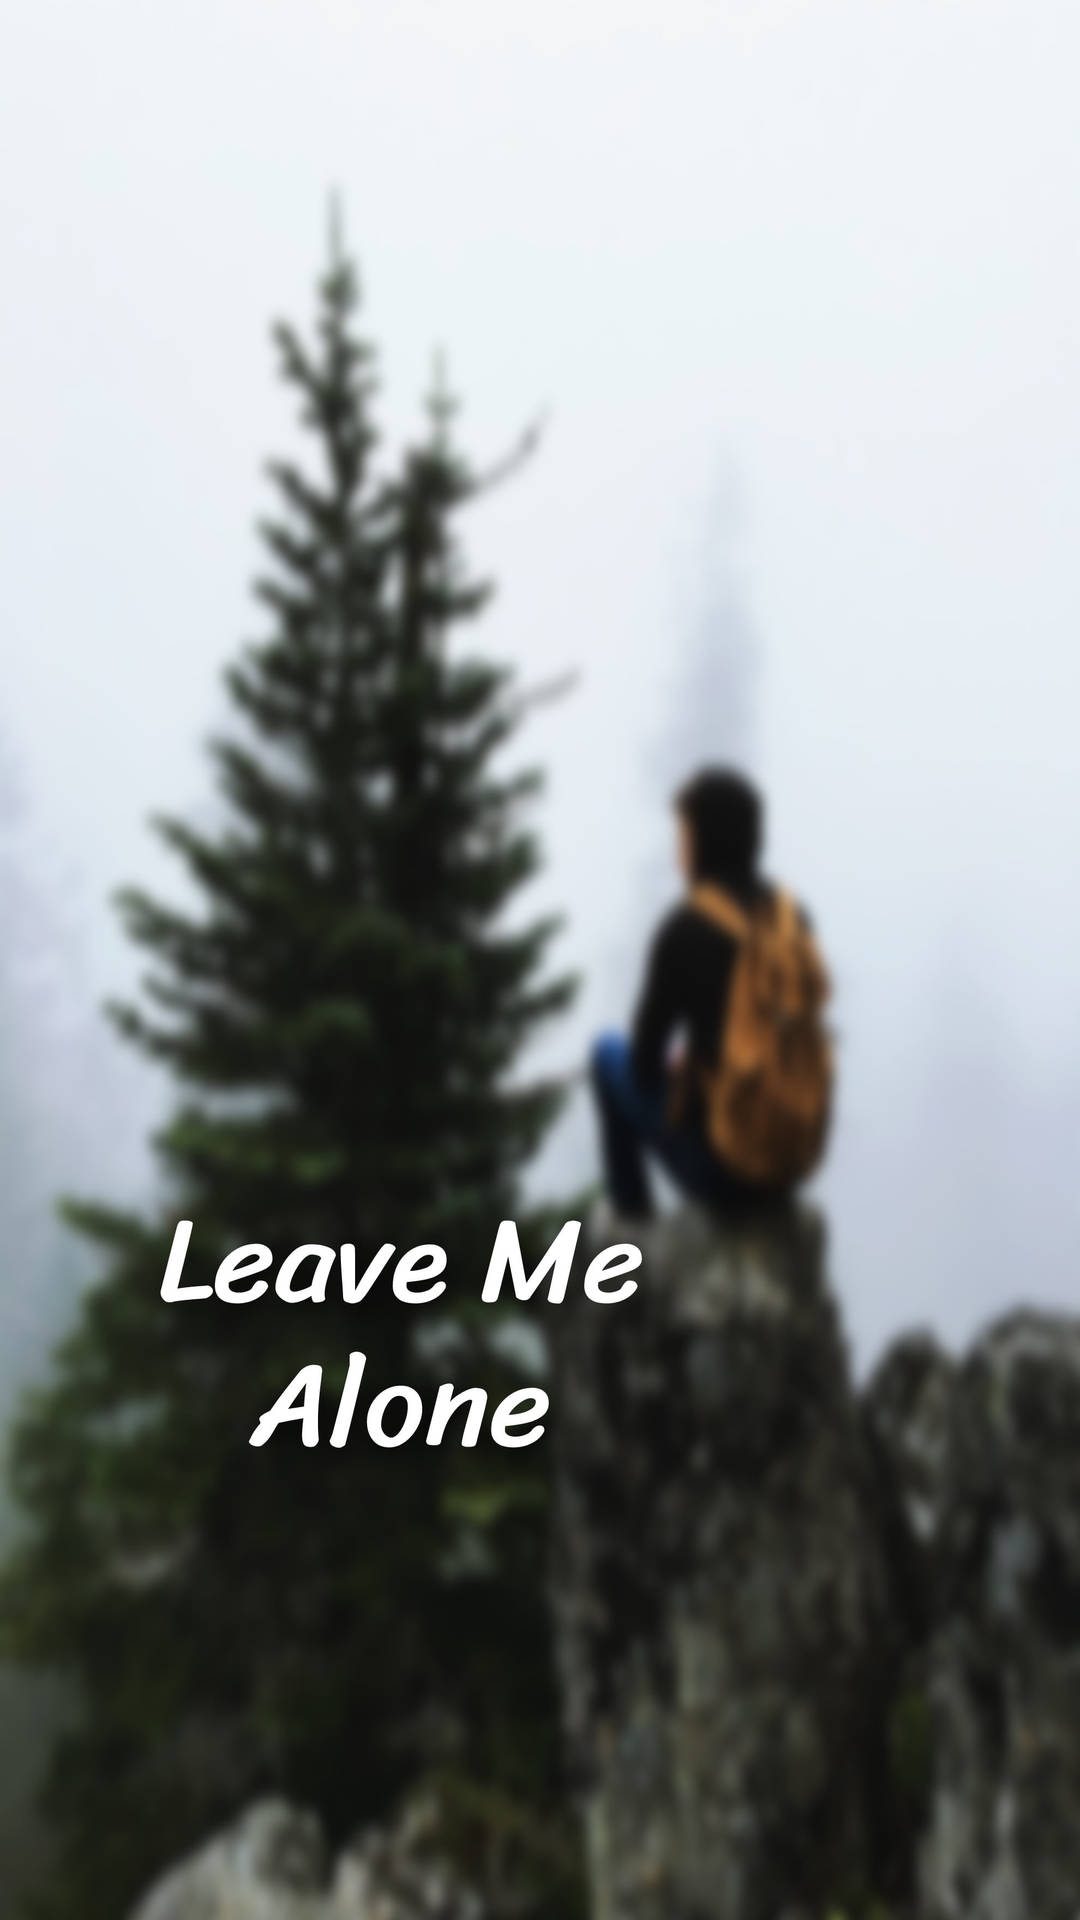 Man On Rock Leave Me Alone Background